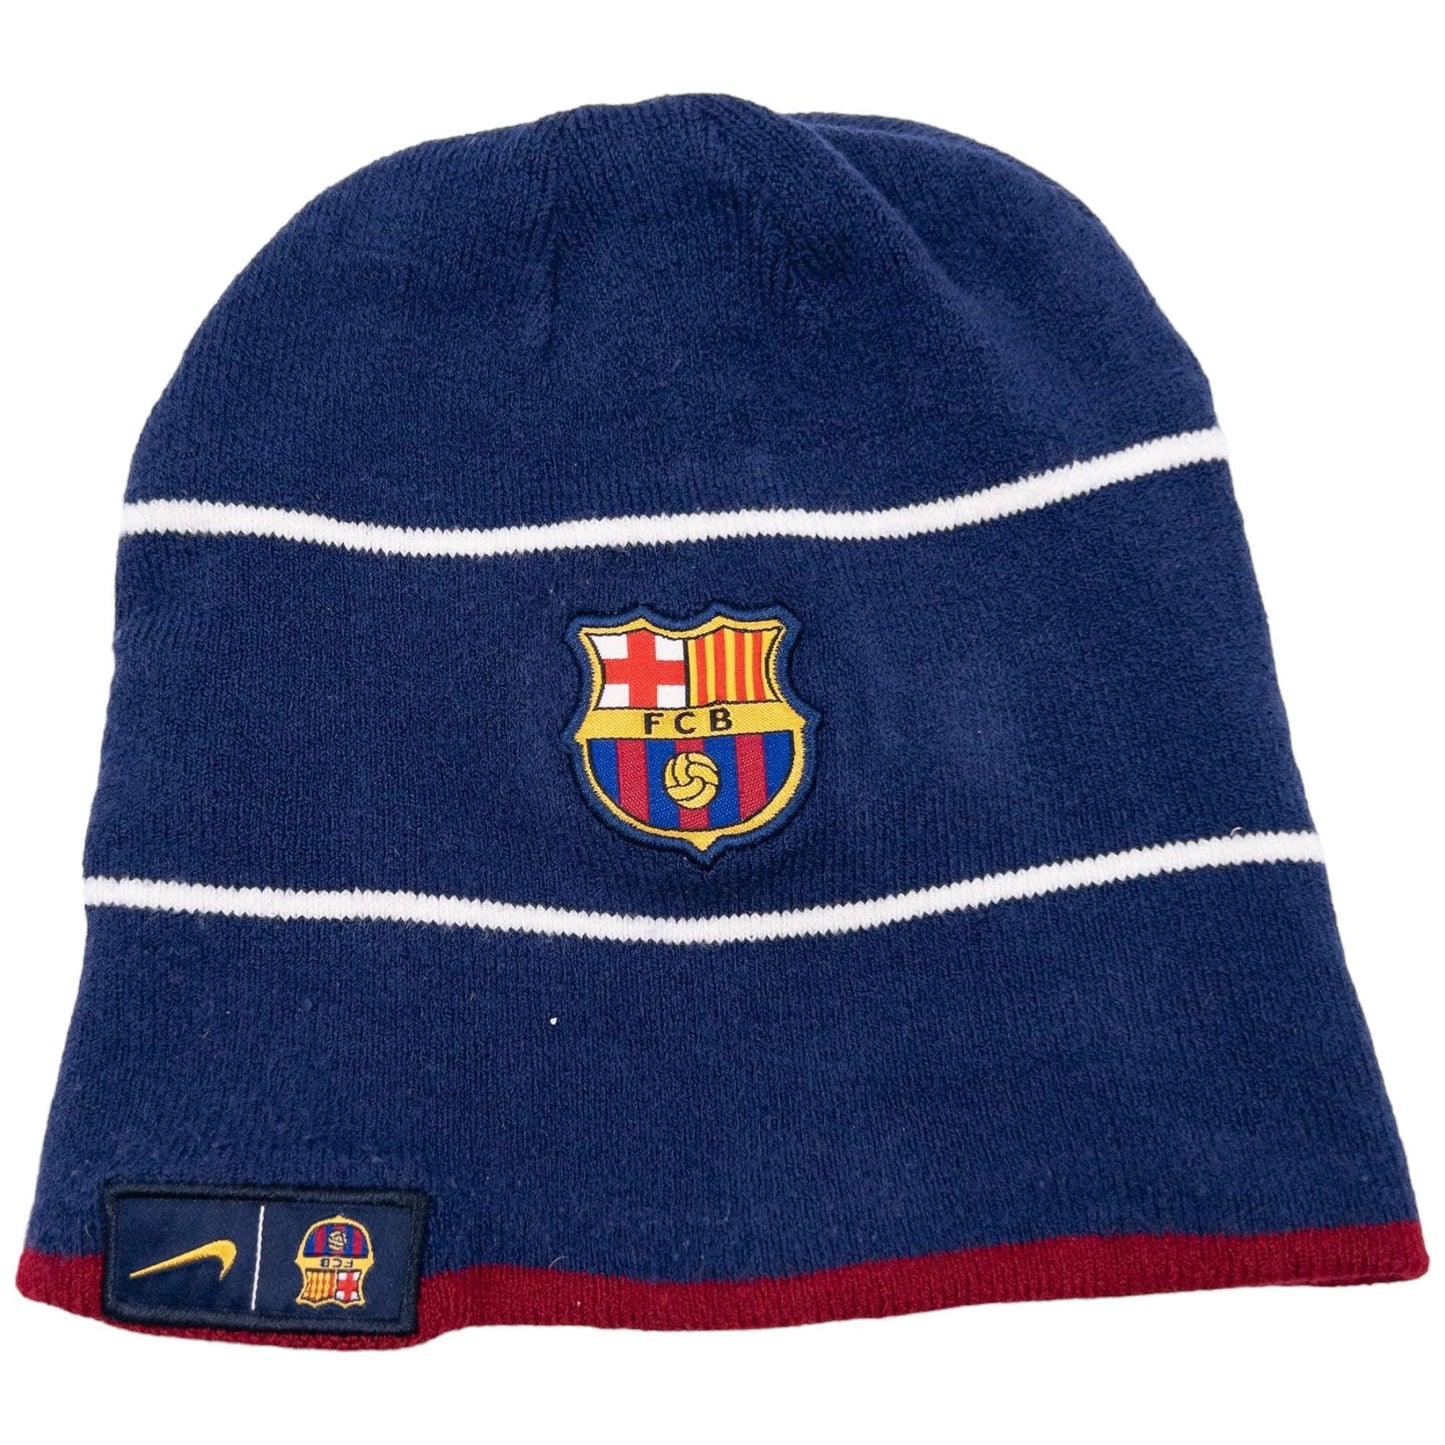 Vintage Nike Barcelona Reversible Beanie Hat - Known Source